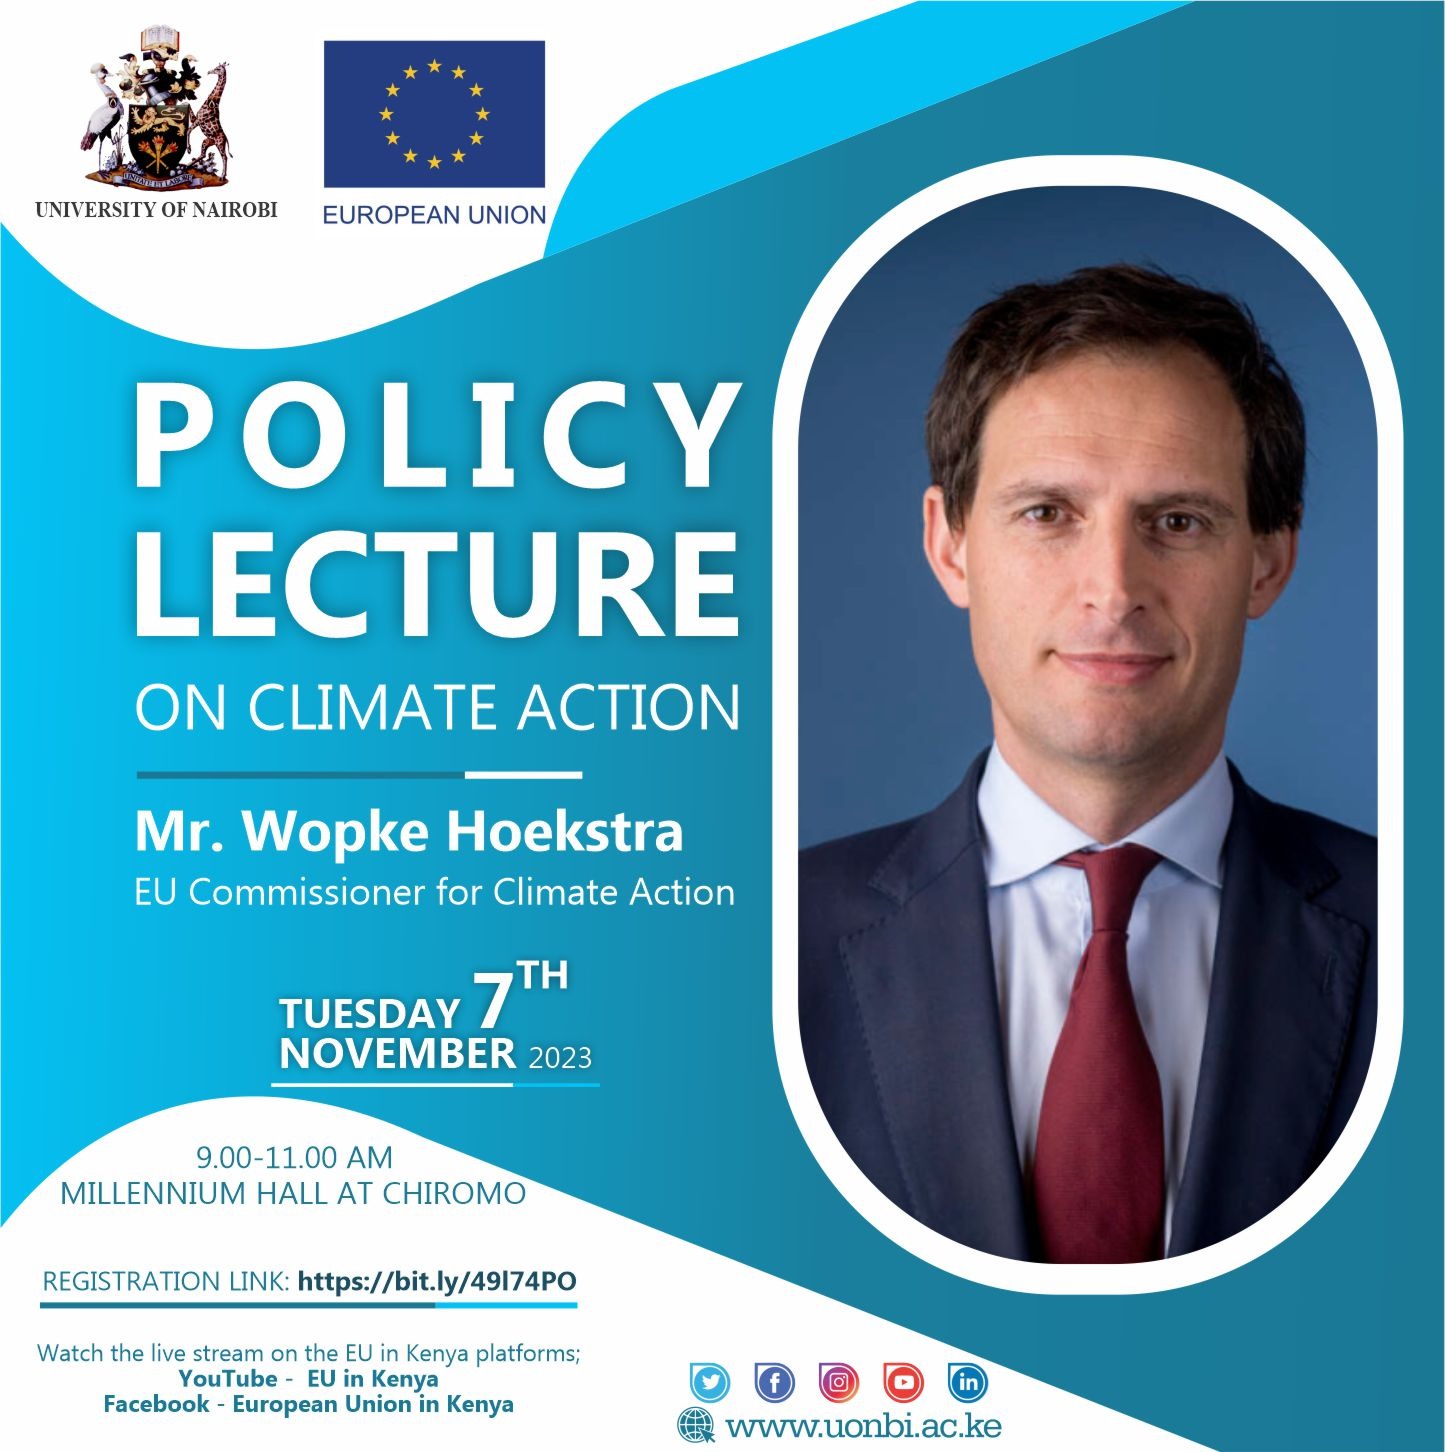 INVITATION TO A POLICY LECTURE BY EU COMMISSIONER ON CLIMATE ACTION